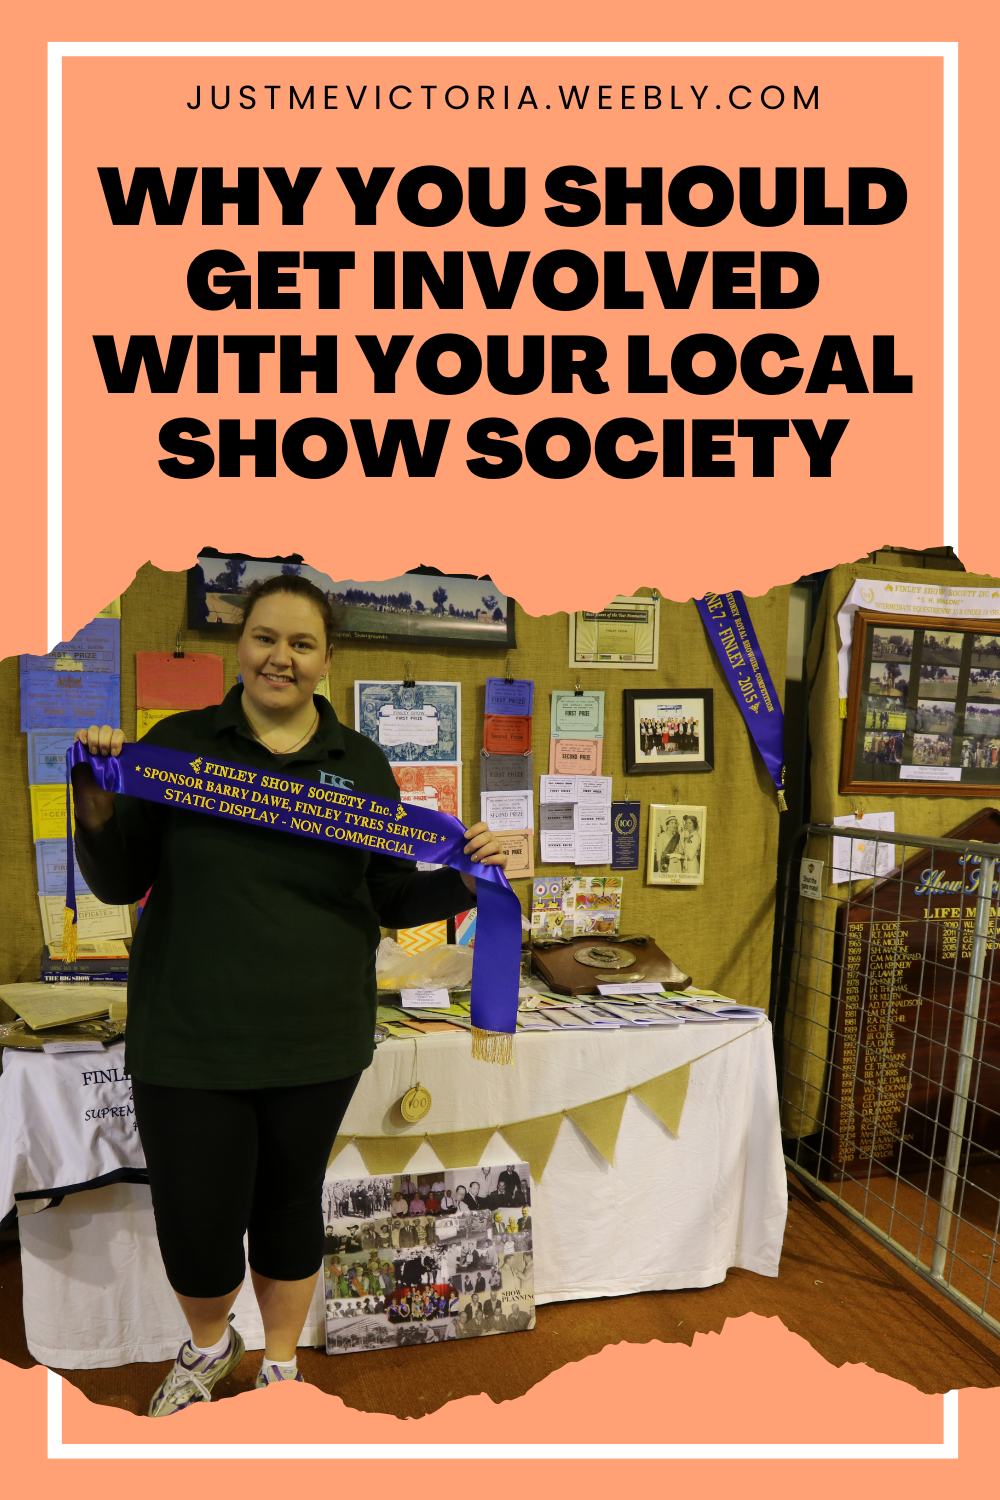 Why You Should Get Inolved With Your Local Show Society